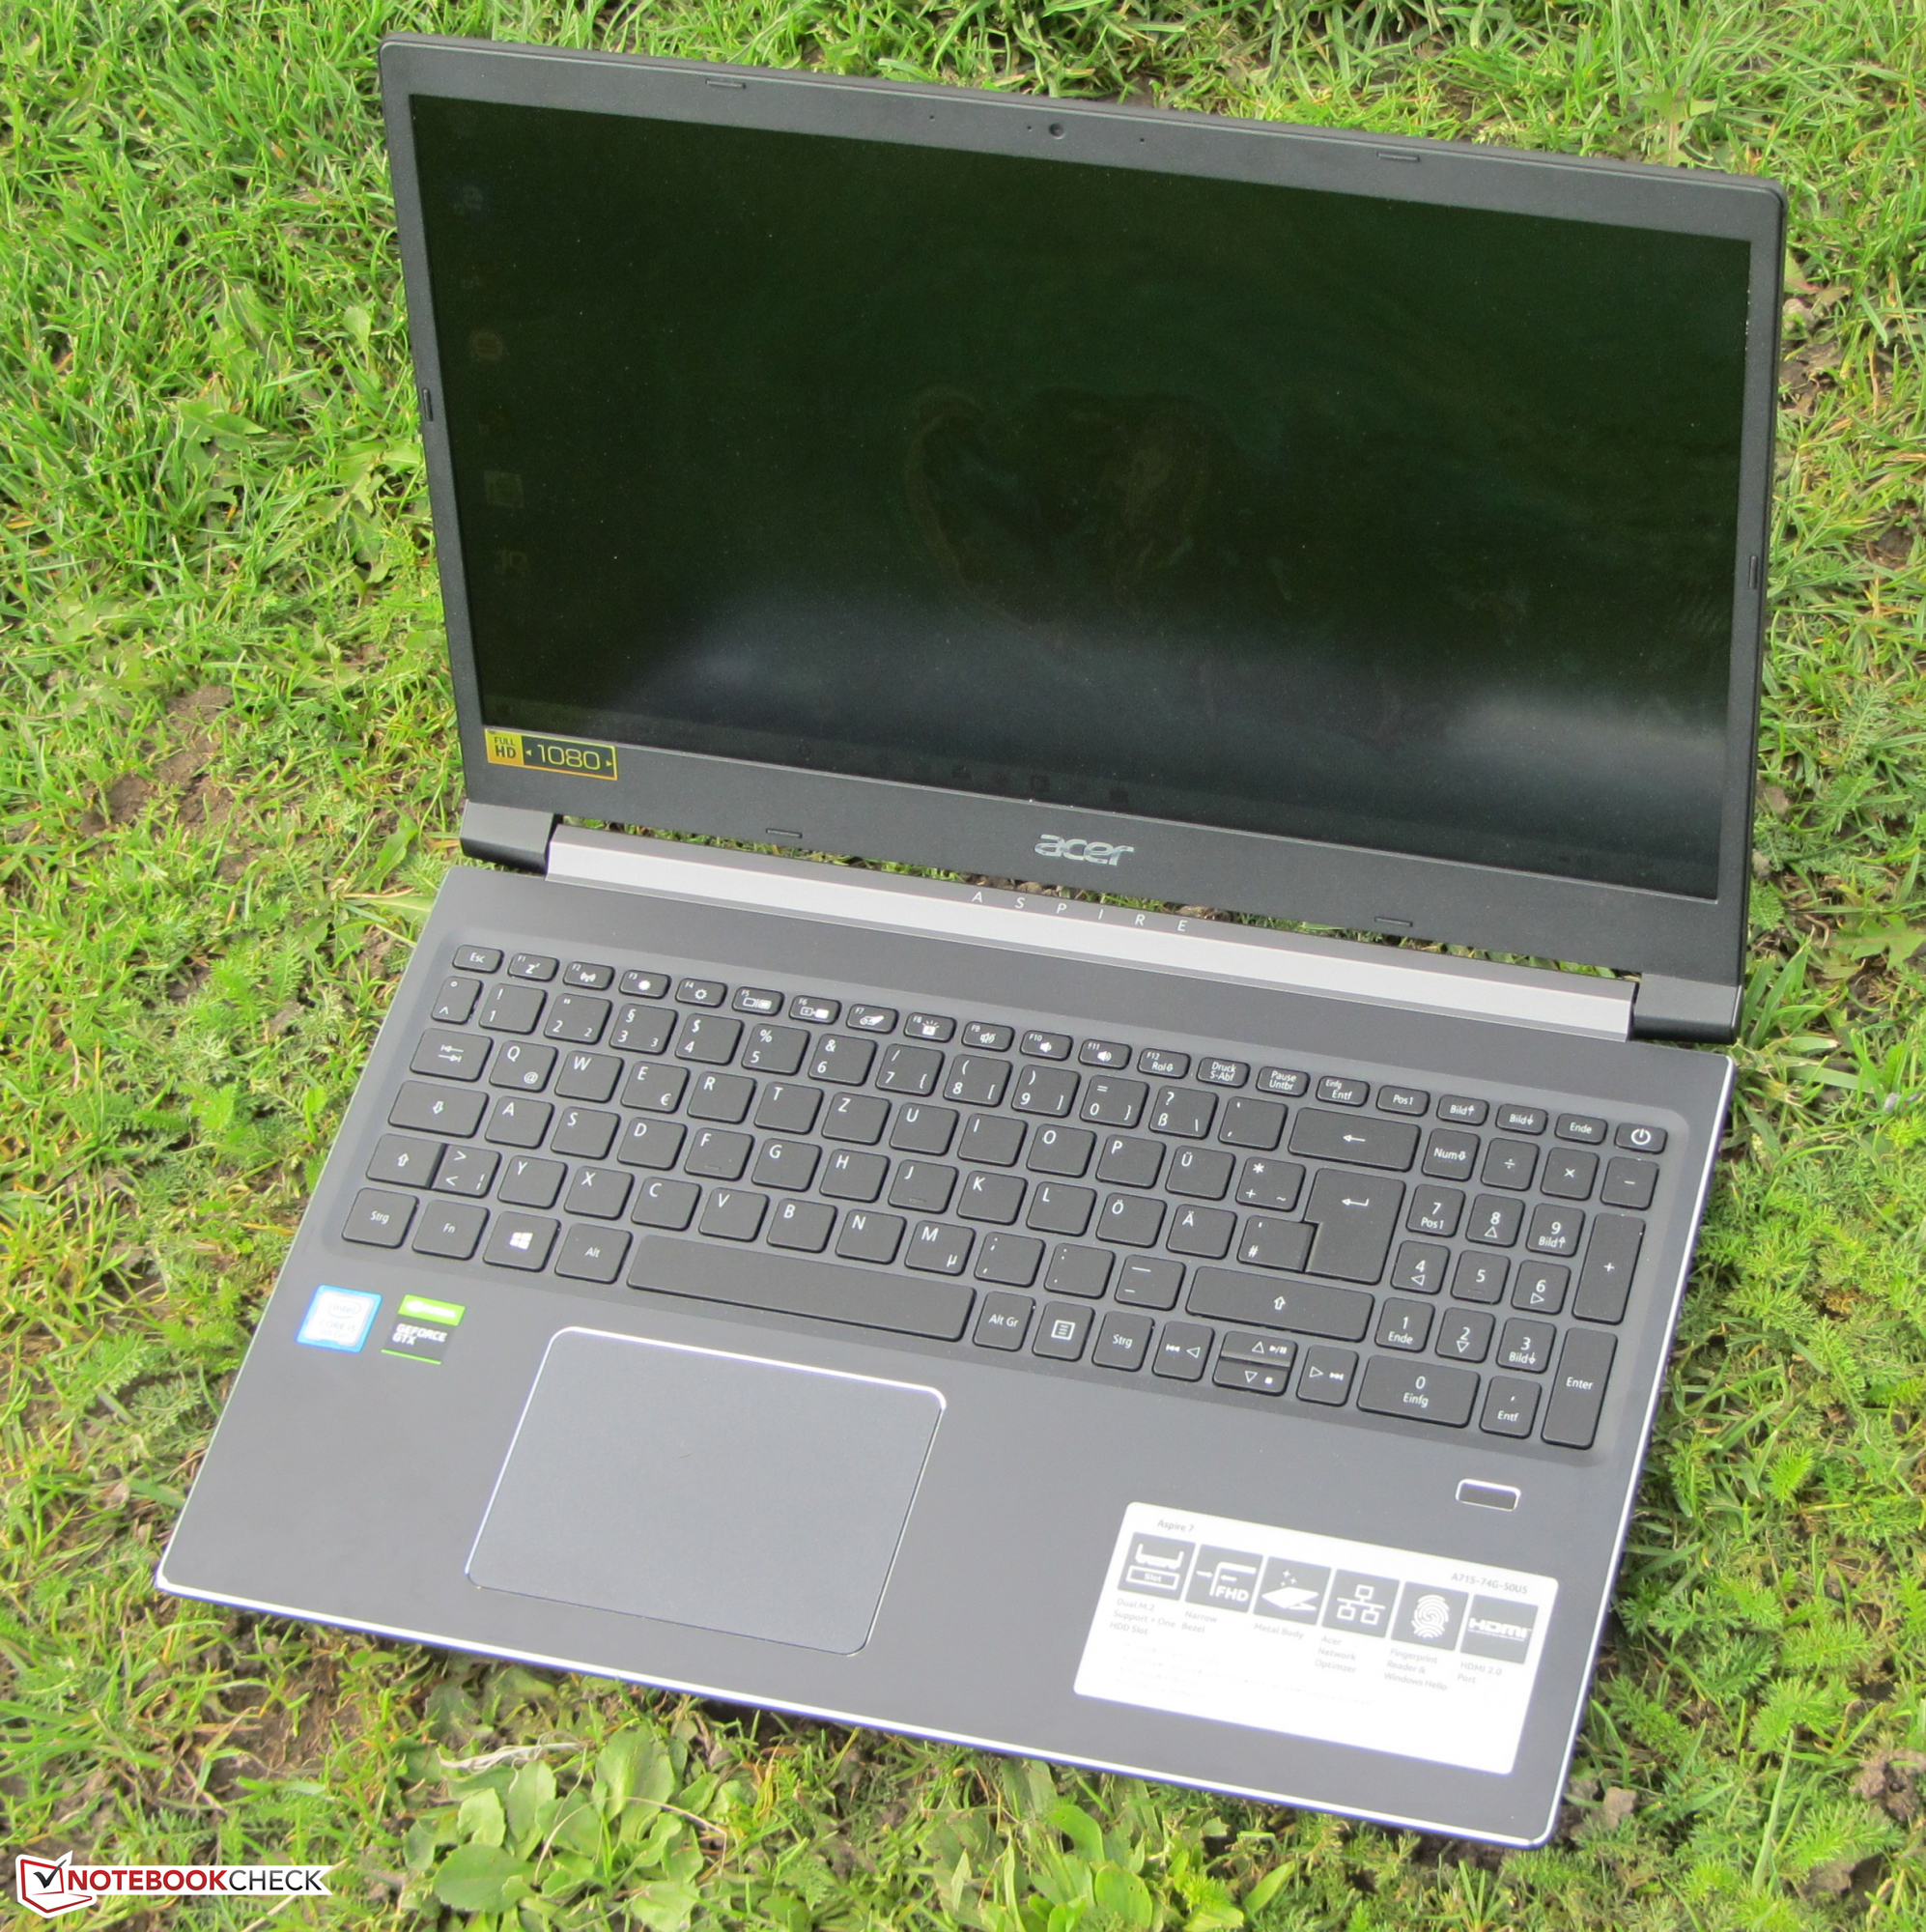 Acer Aspire 7 (A715-76G) review - good all-rounder that can be